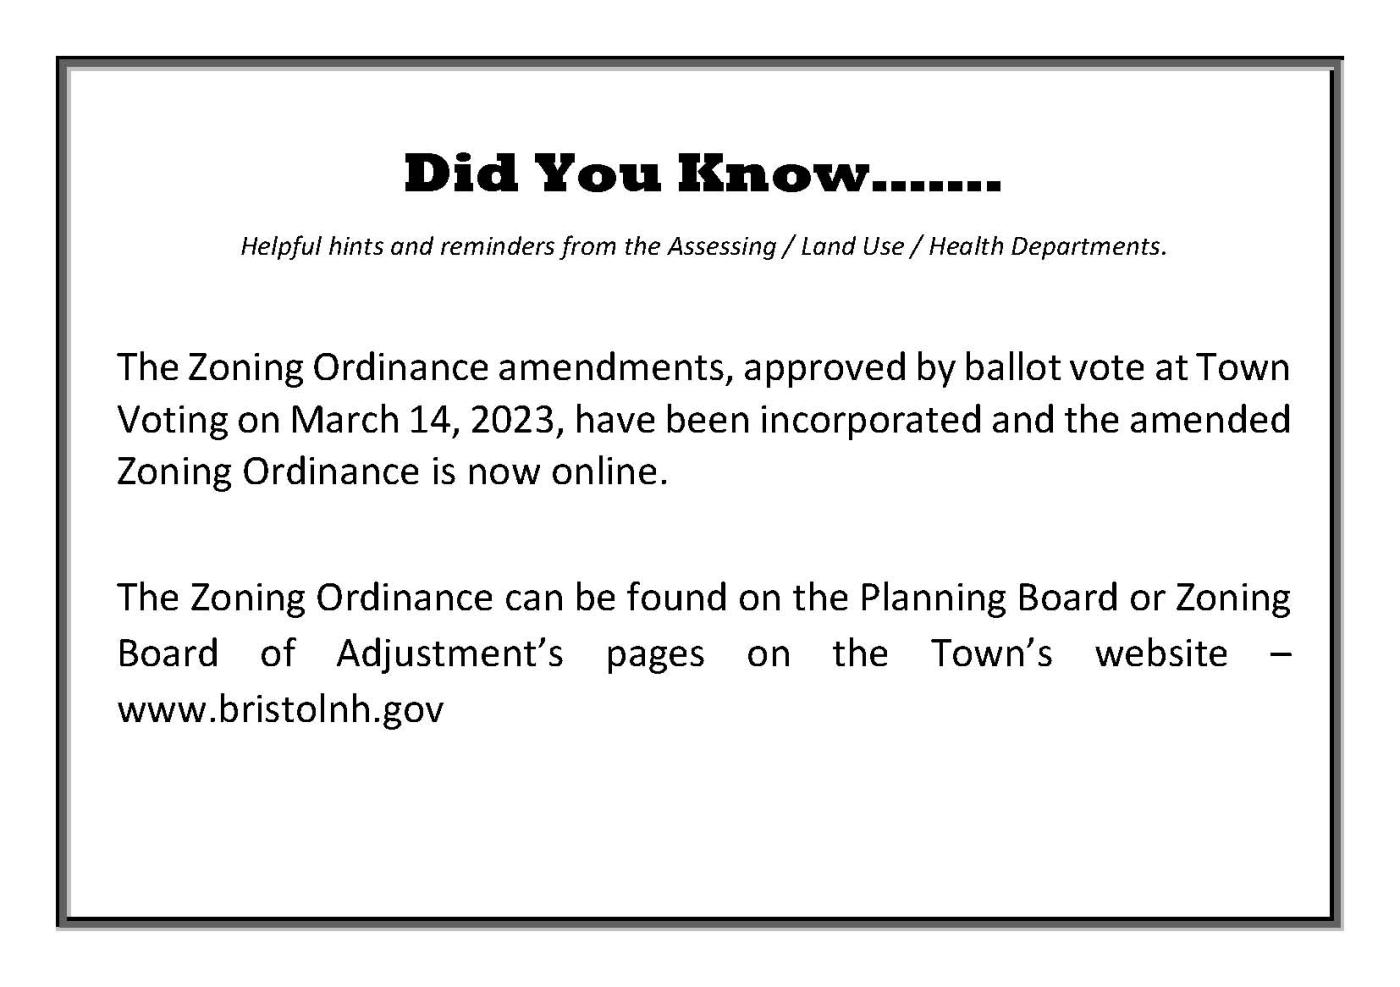 Did You Know…….  Helpful hints and reminders from the Assessing / Land Use / Health Departments.  The Zoning Ordinance amendments, approved by ballot vote at Town Voting on March 14, 2023, have been incorporated and the amended Zoning Ordinance is now online.  The Zoning Ordinance can be found on the Planning Board or Zoning Board of Adjustment’s pages on the Town’s website – www.bristolnh.gov